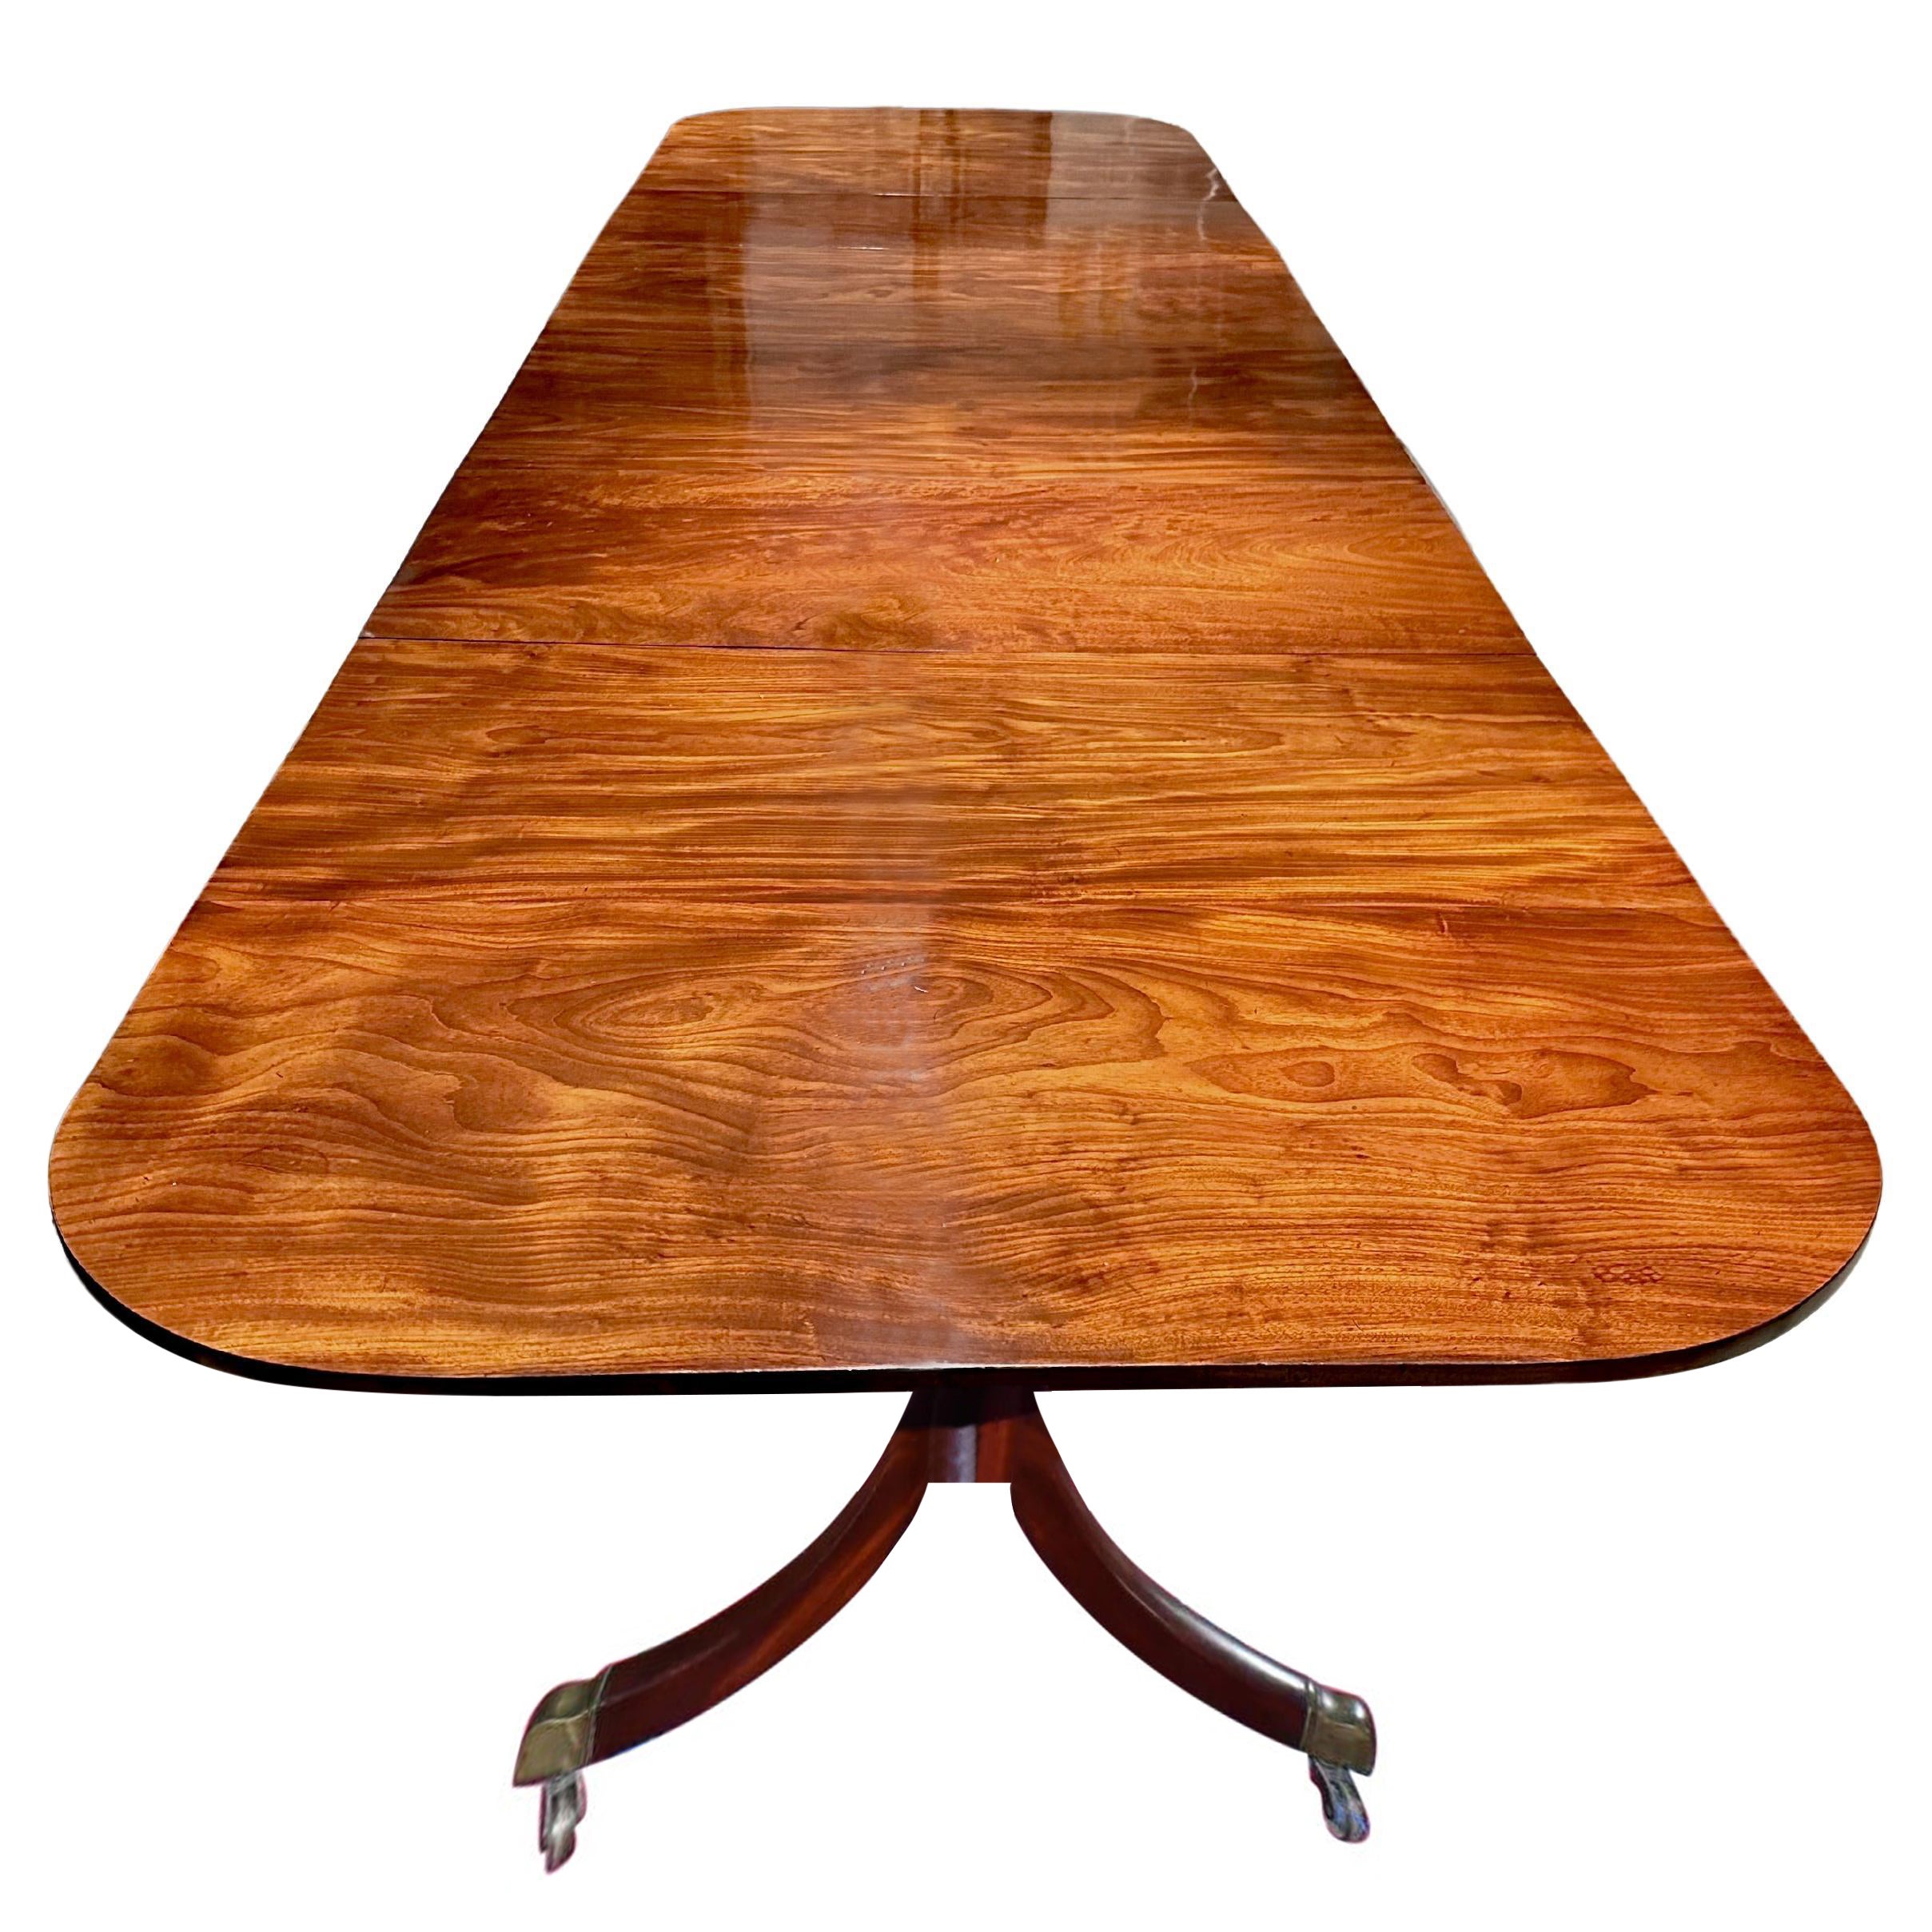 An exceptional George III or Regency mahogany triple pedestal dining table with two additional leaves.   The rectangular top having rounded corners, each top of three fine richly grained and colored mahogany boards tilting above three pedestal bases